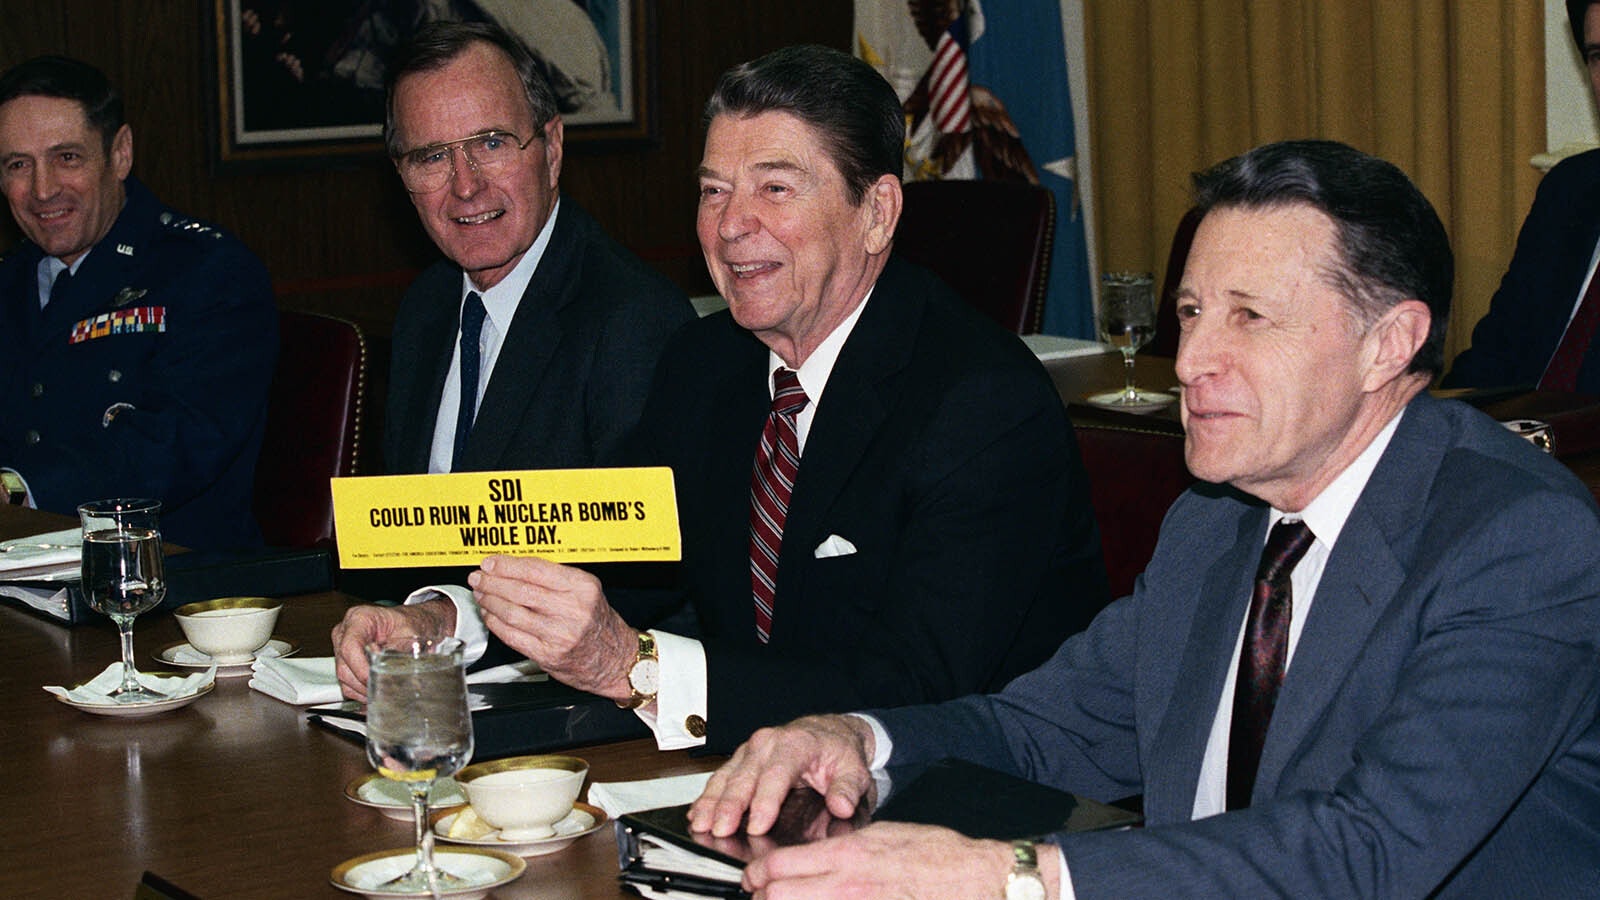 President Ronald Reagan shows support for the Strategic Defense Initiative nicknamed Star Wars. The bumper sticker reads "SDI could ruin a nuclear bombs whole day."